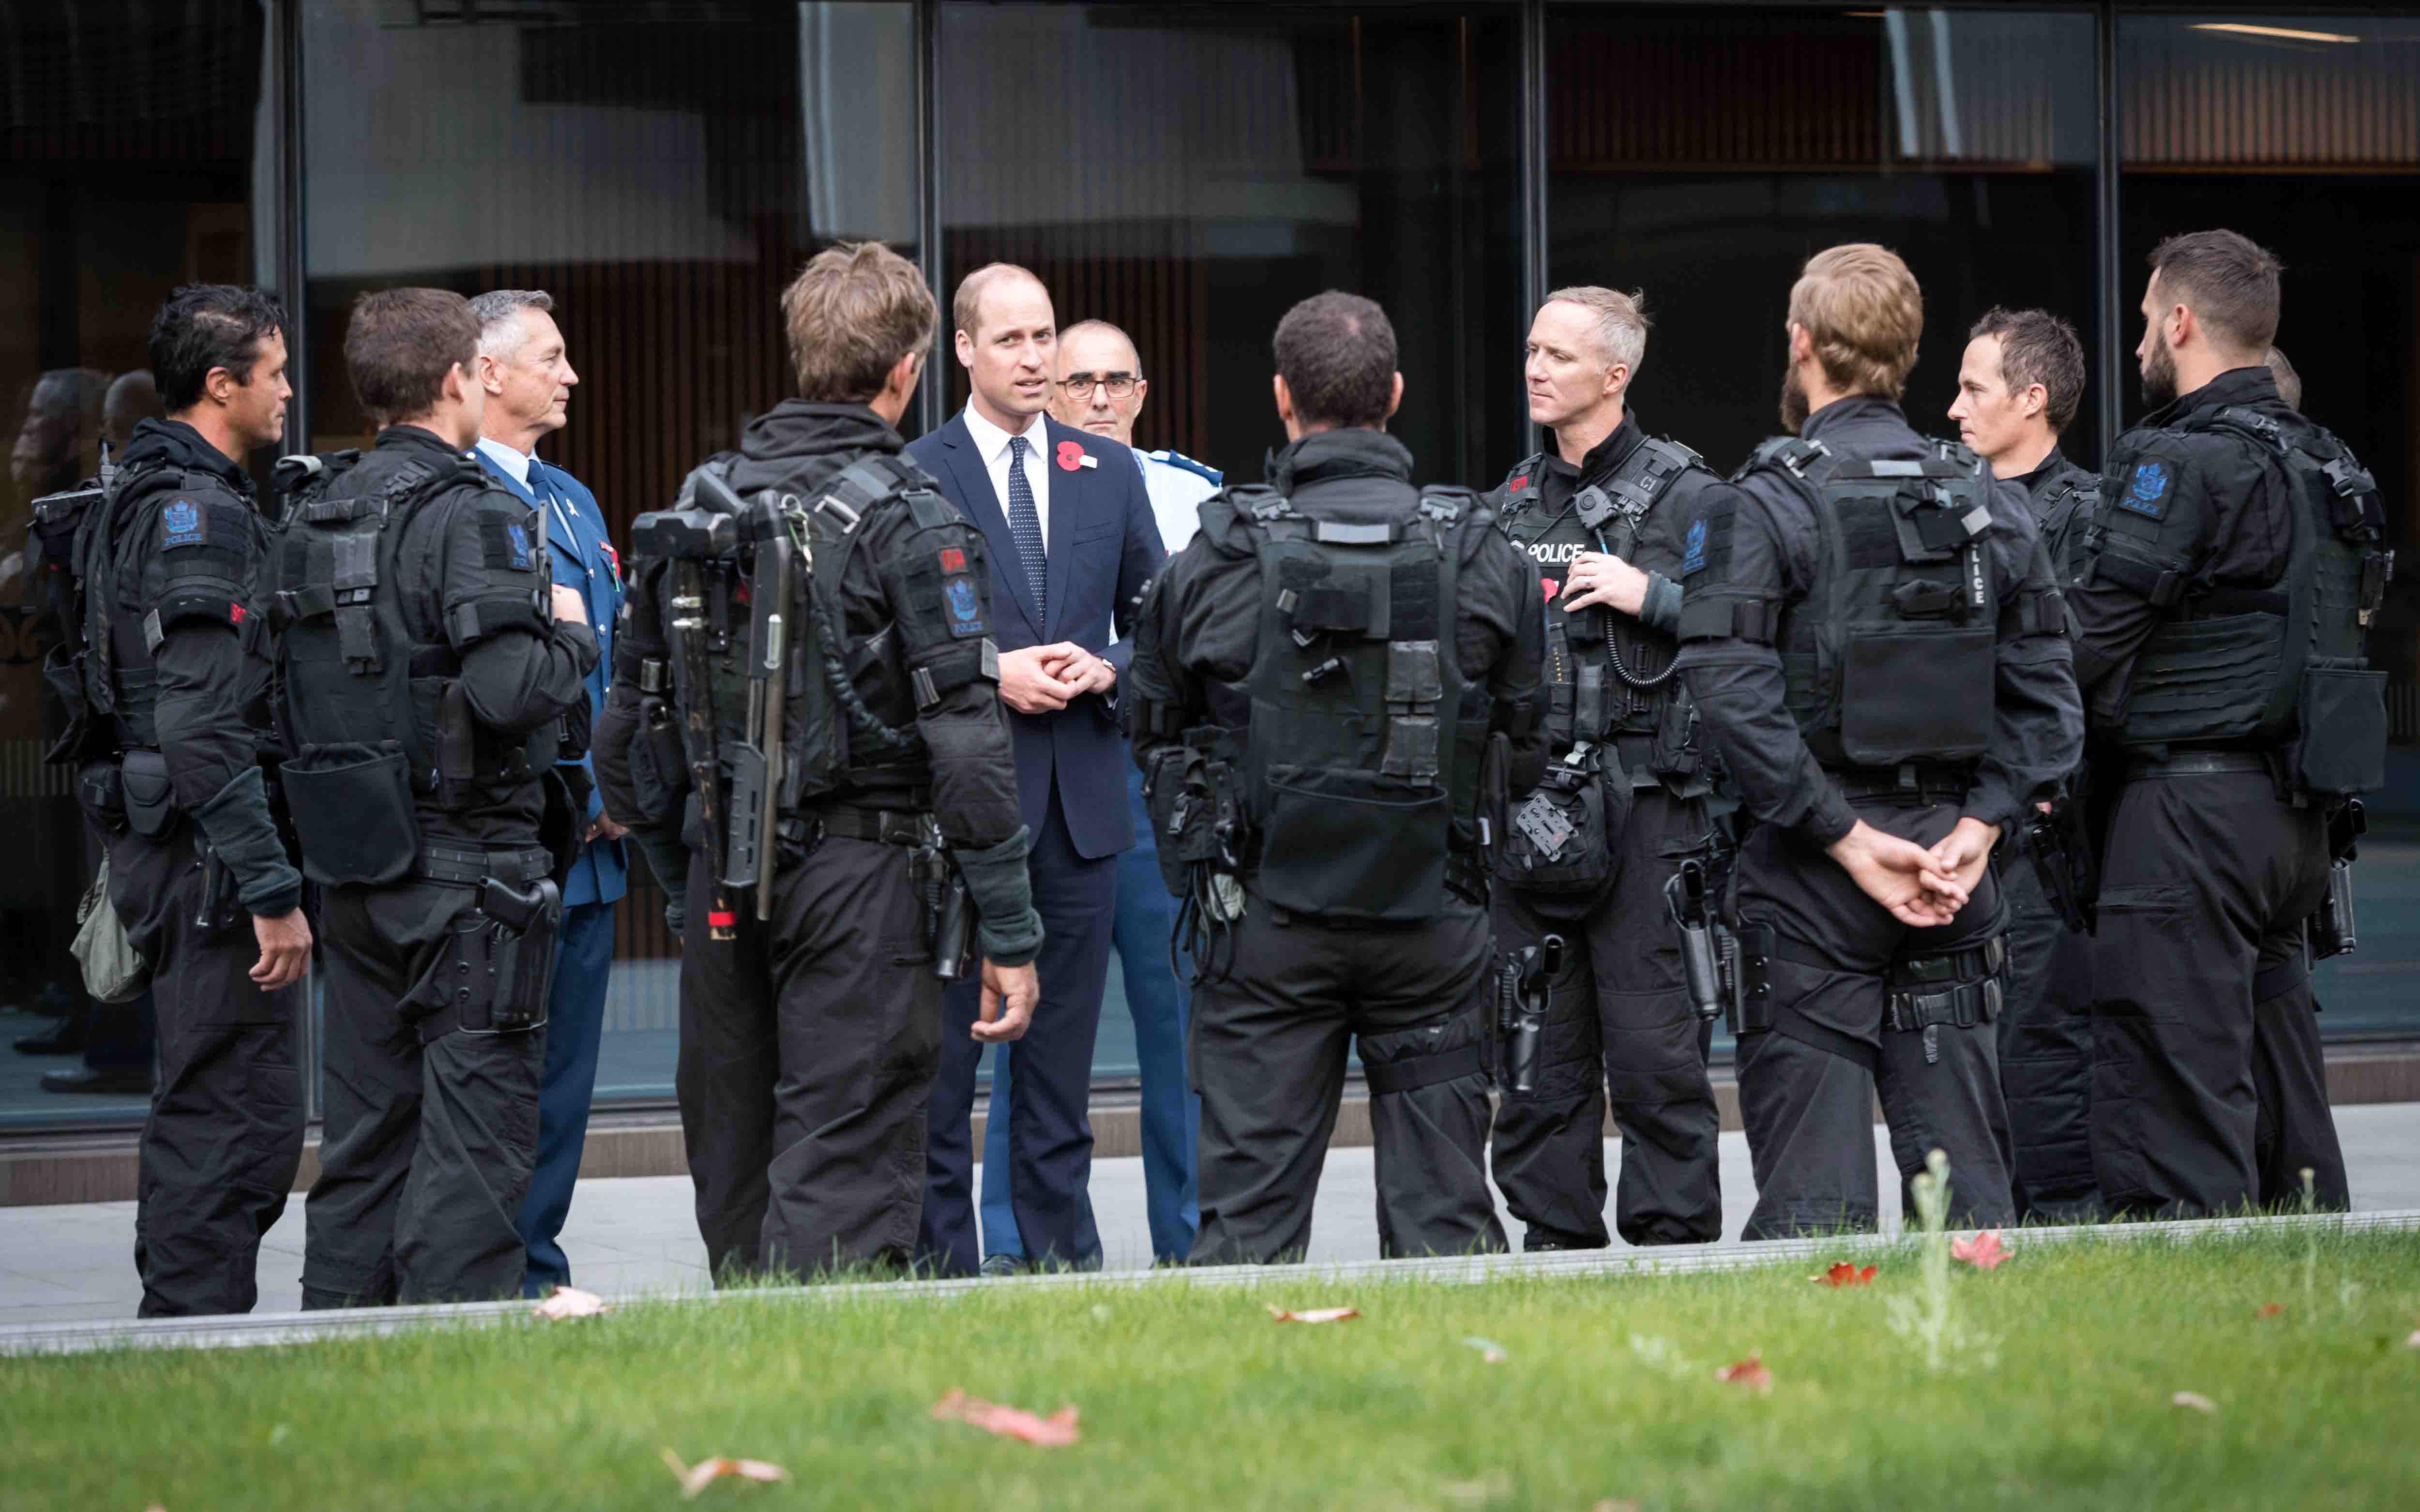 'Prince William meets members of the Armed Offenders Squad